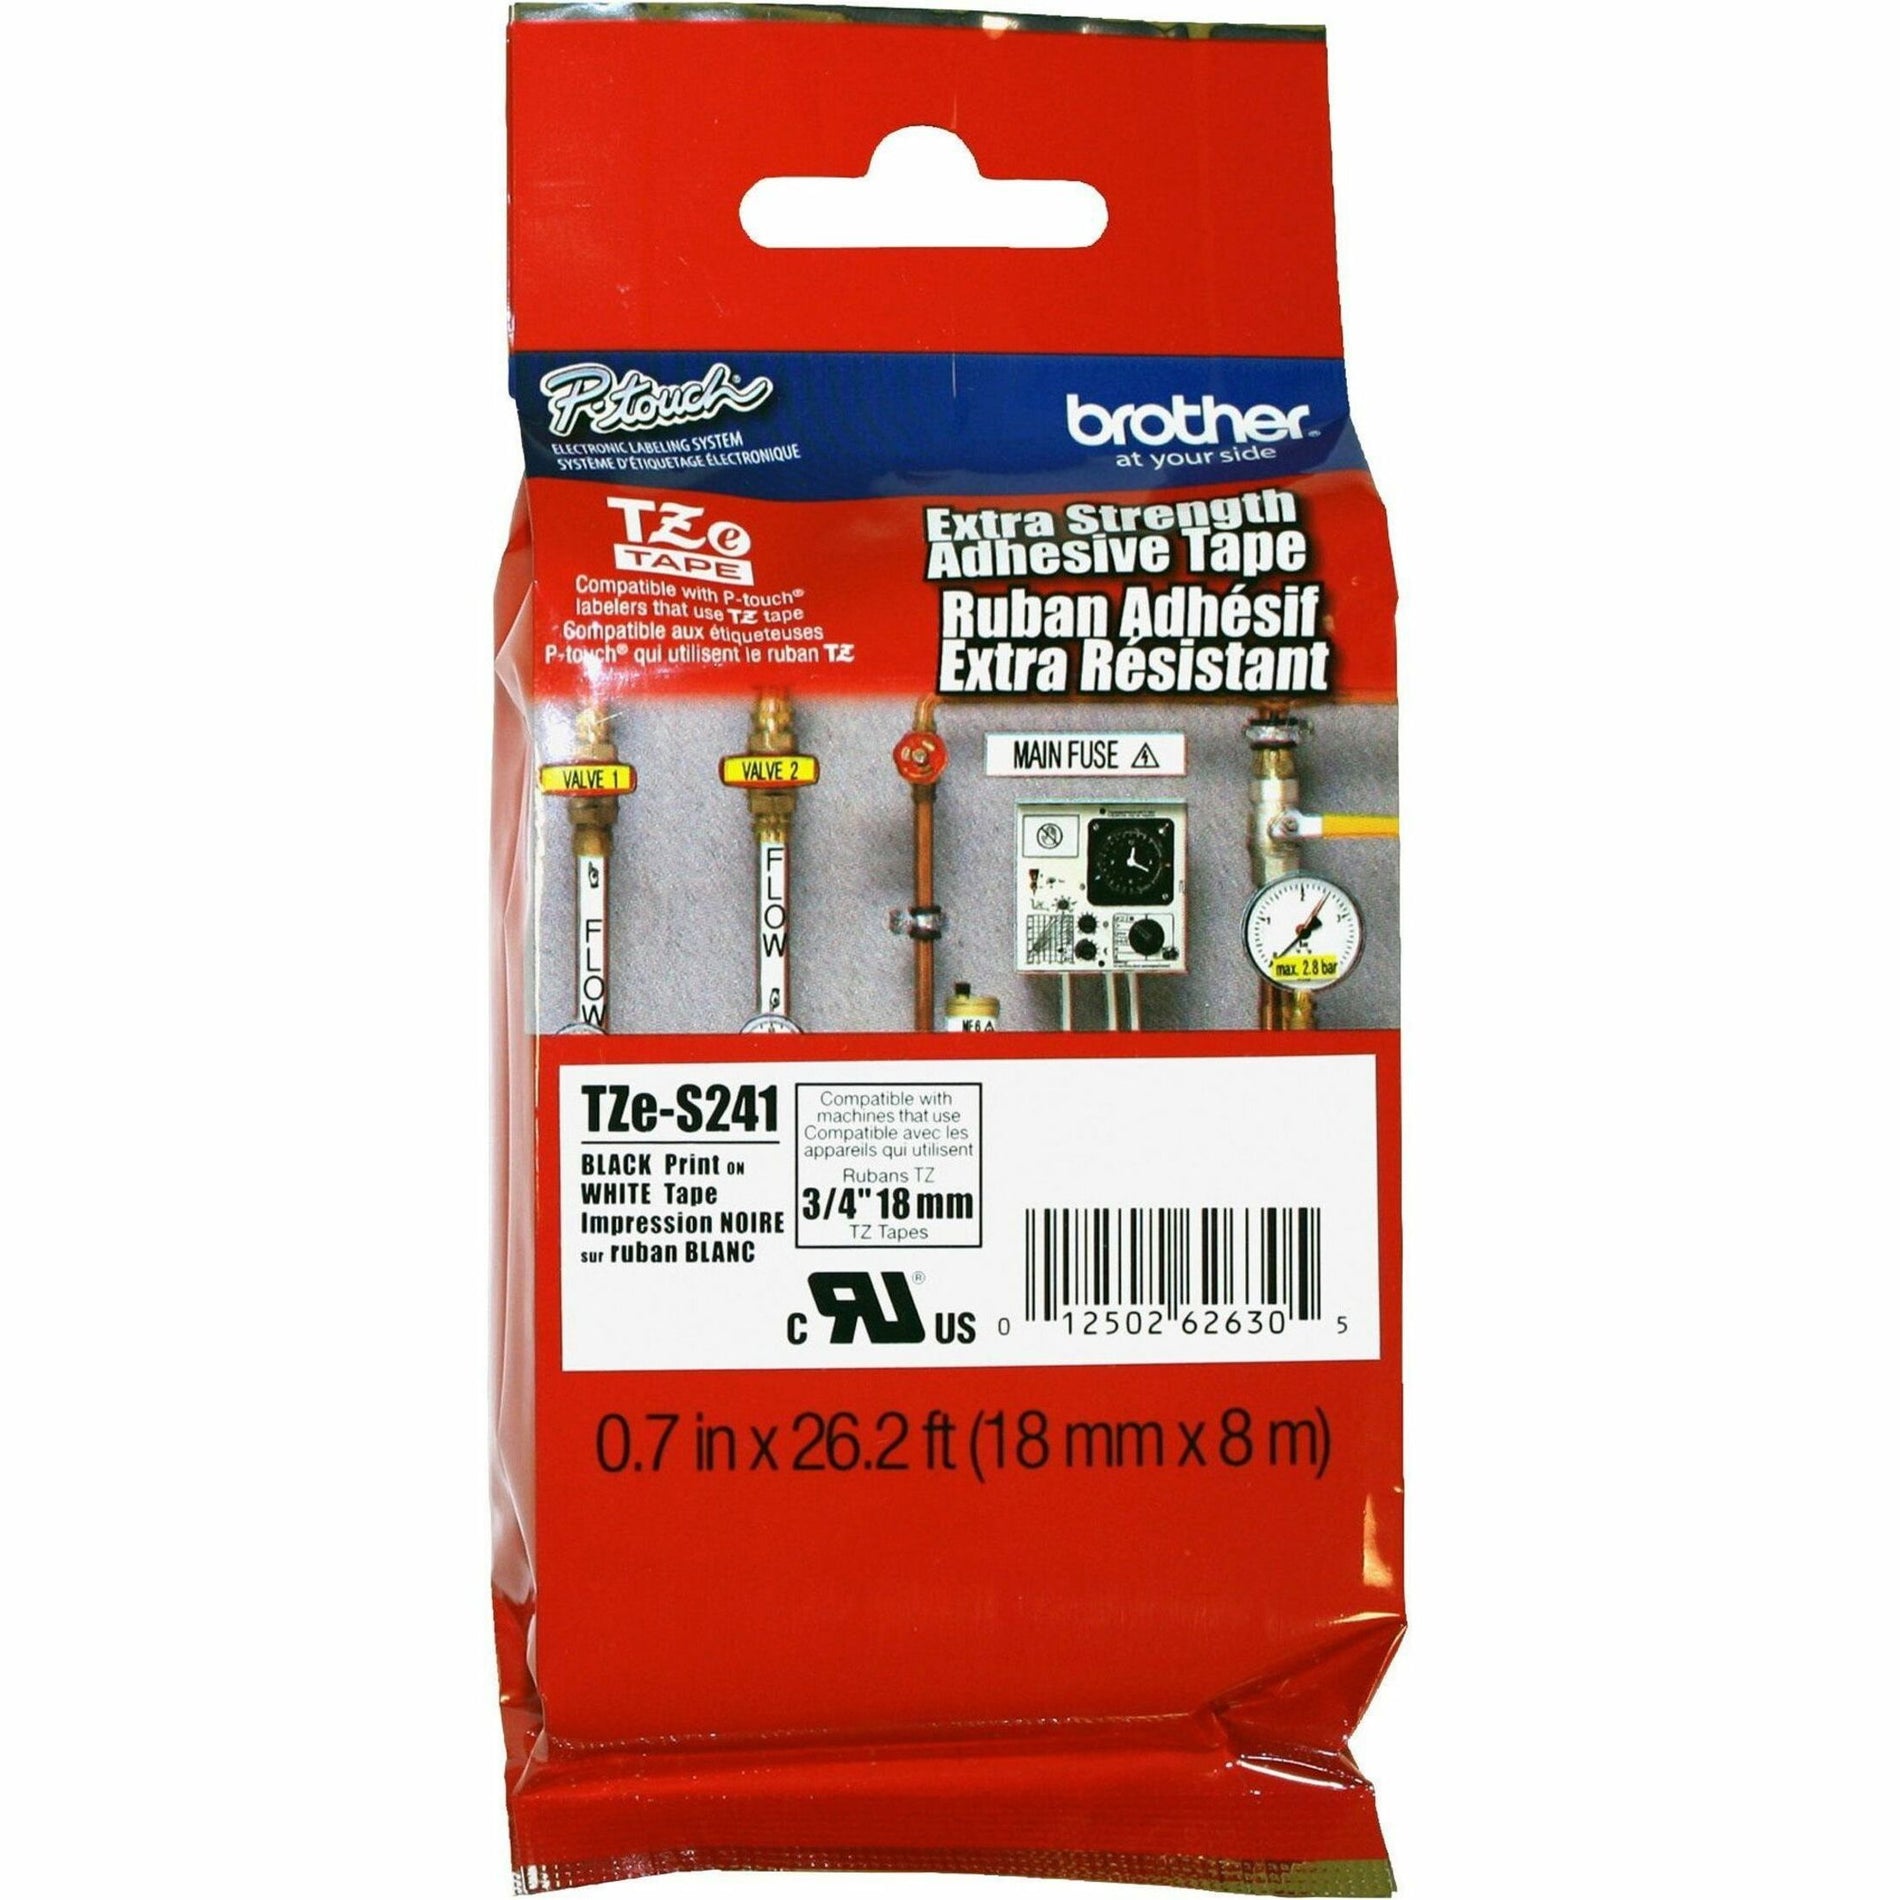 Brother TZES241 Extra Strength Adhesive 3/4" Laminated Tape, Abrasion Resistant, Fade Resistant